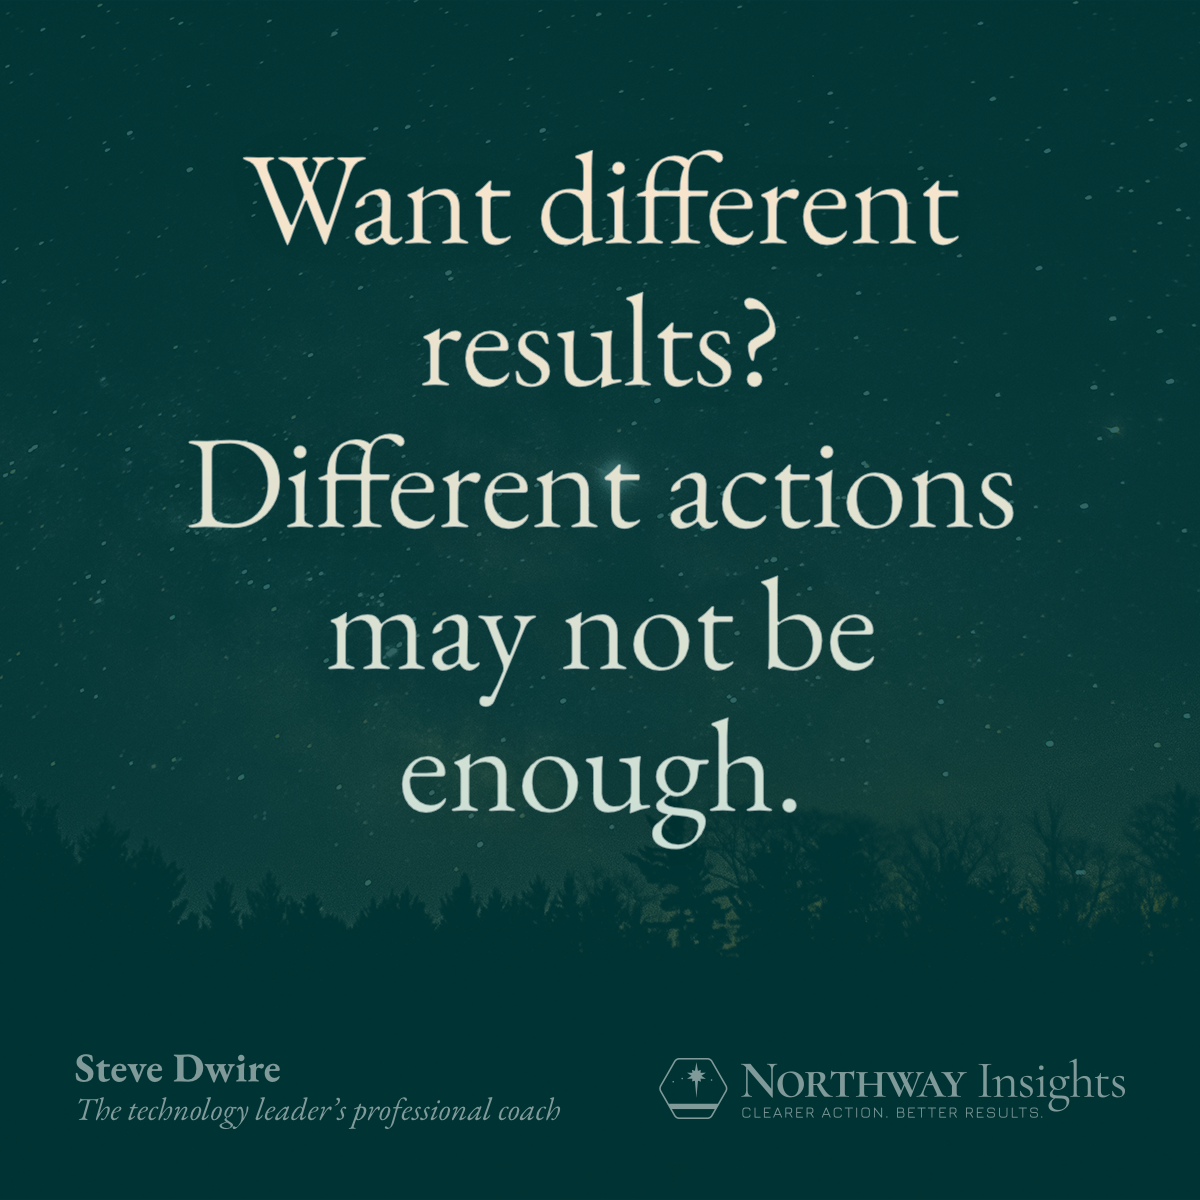 Want different results? Different actions may not be enough